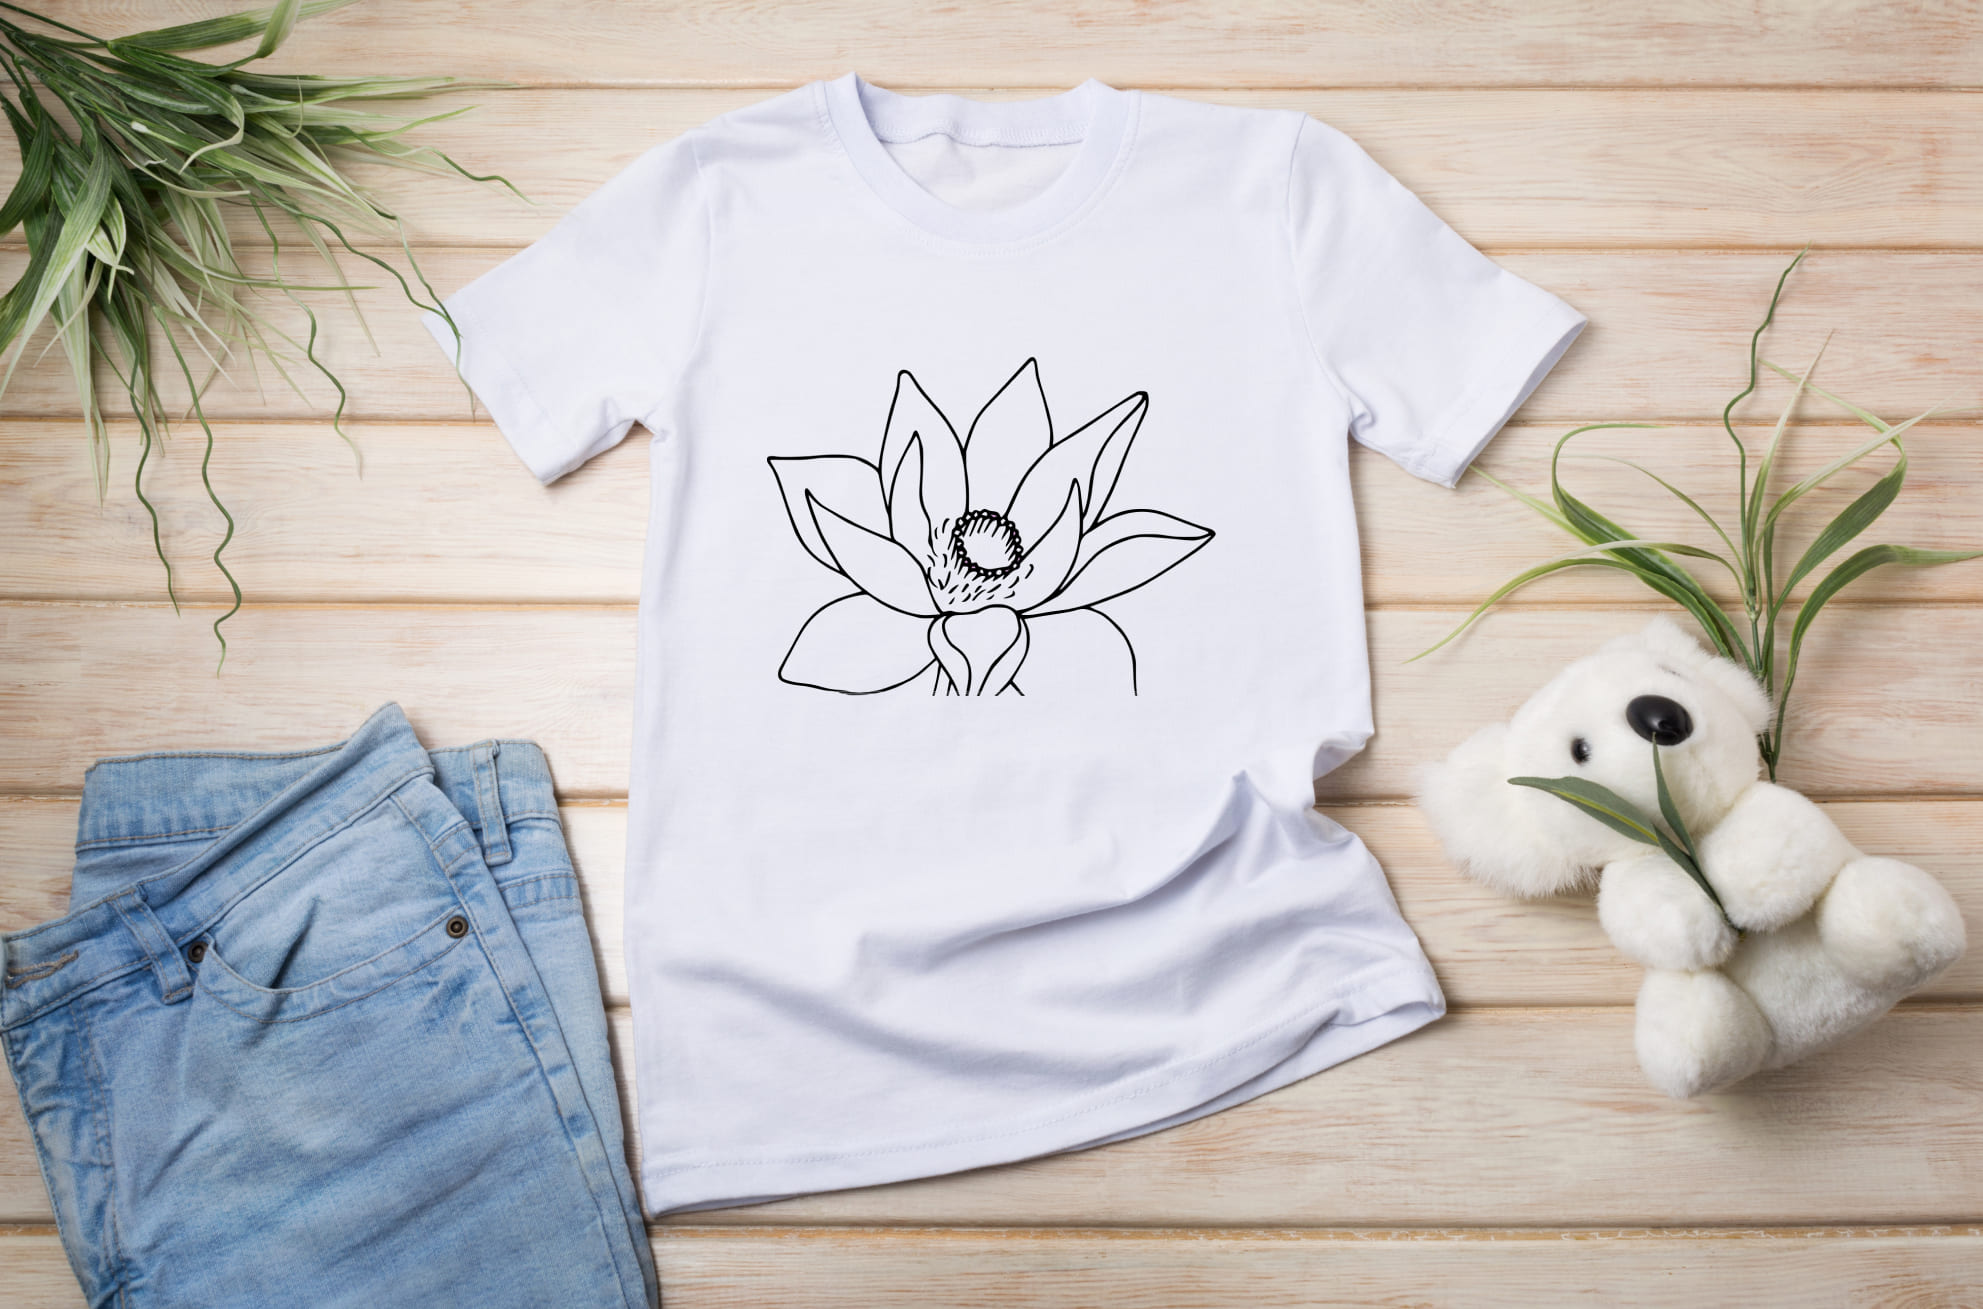 Delicate lotus flower on the white t-shirt.